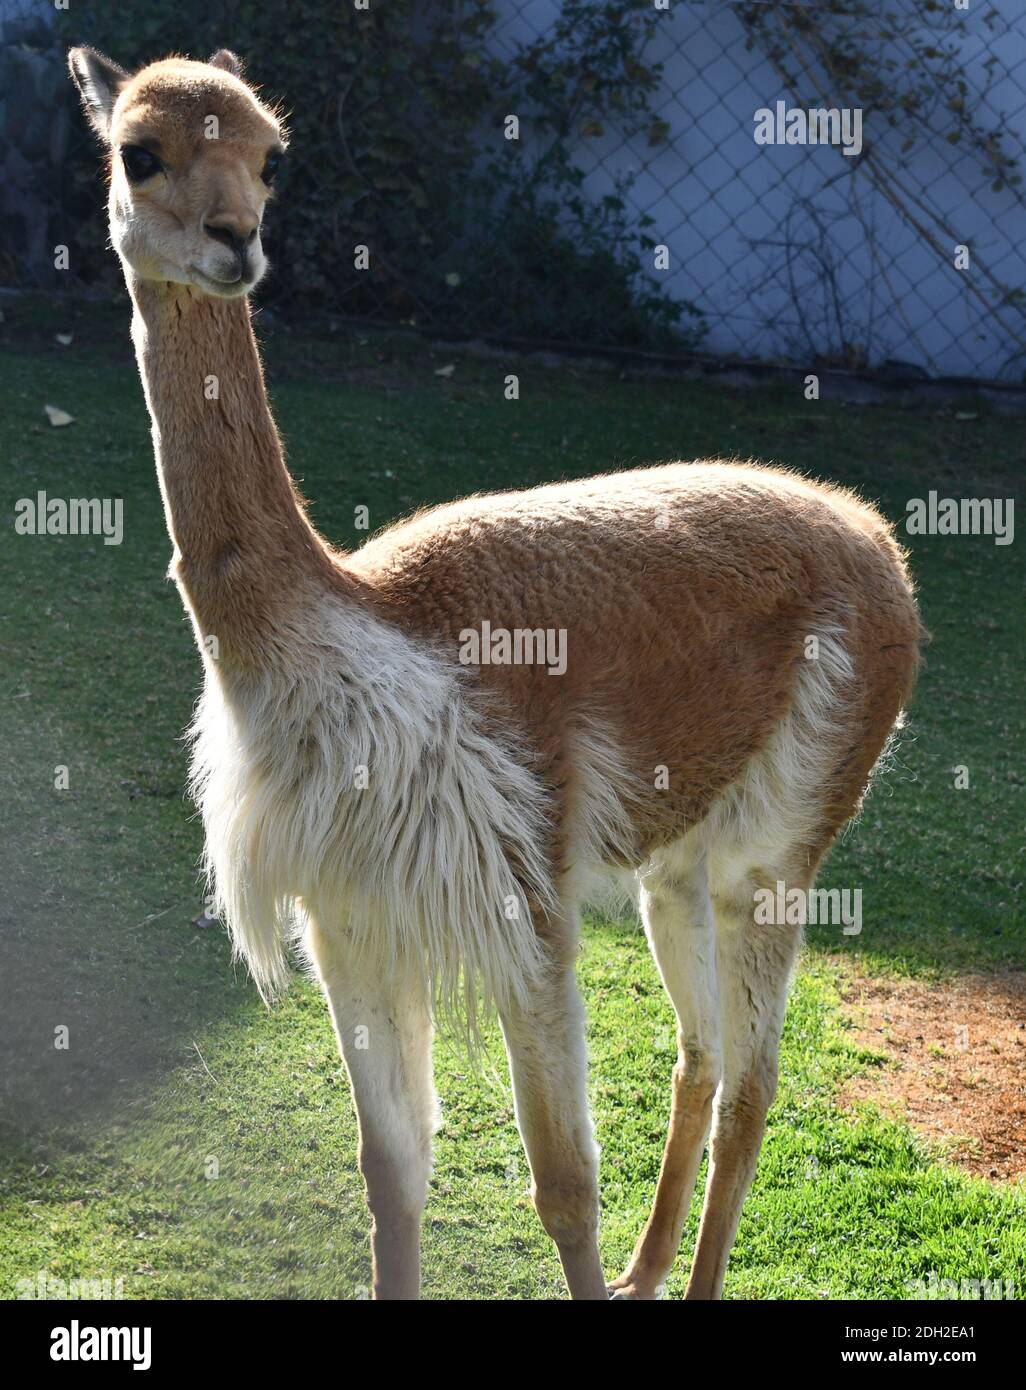 Vicuna, one of the two wild animals in the camel family in Peru, South America. It has the most expensive wool. Stock Photo